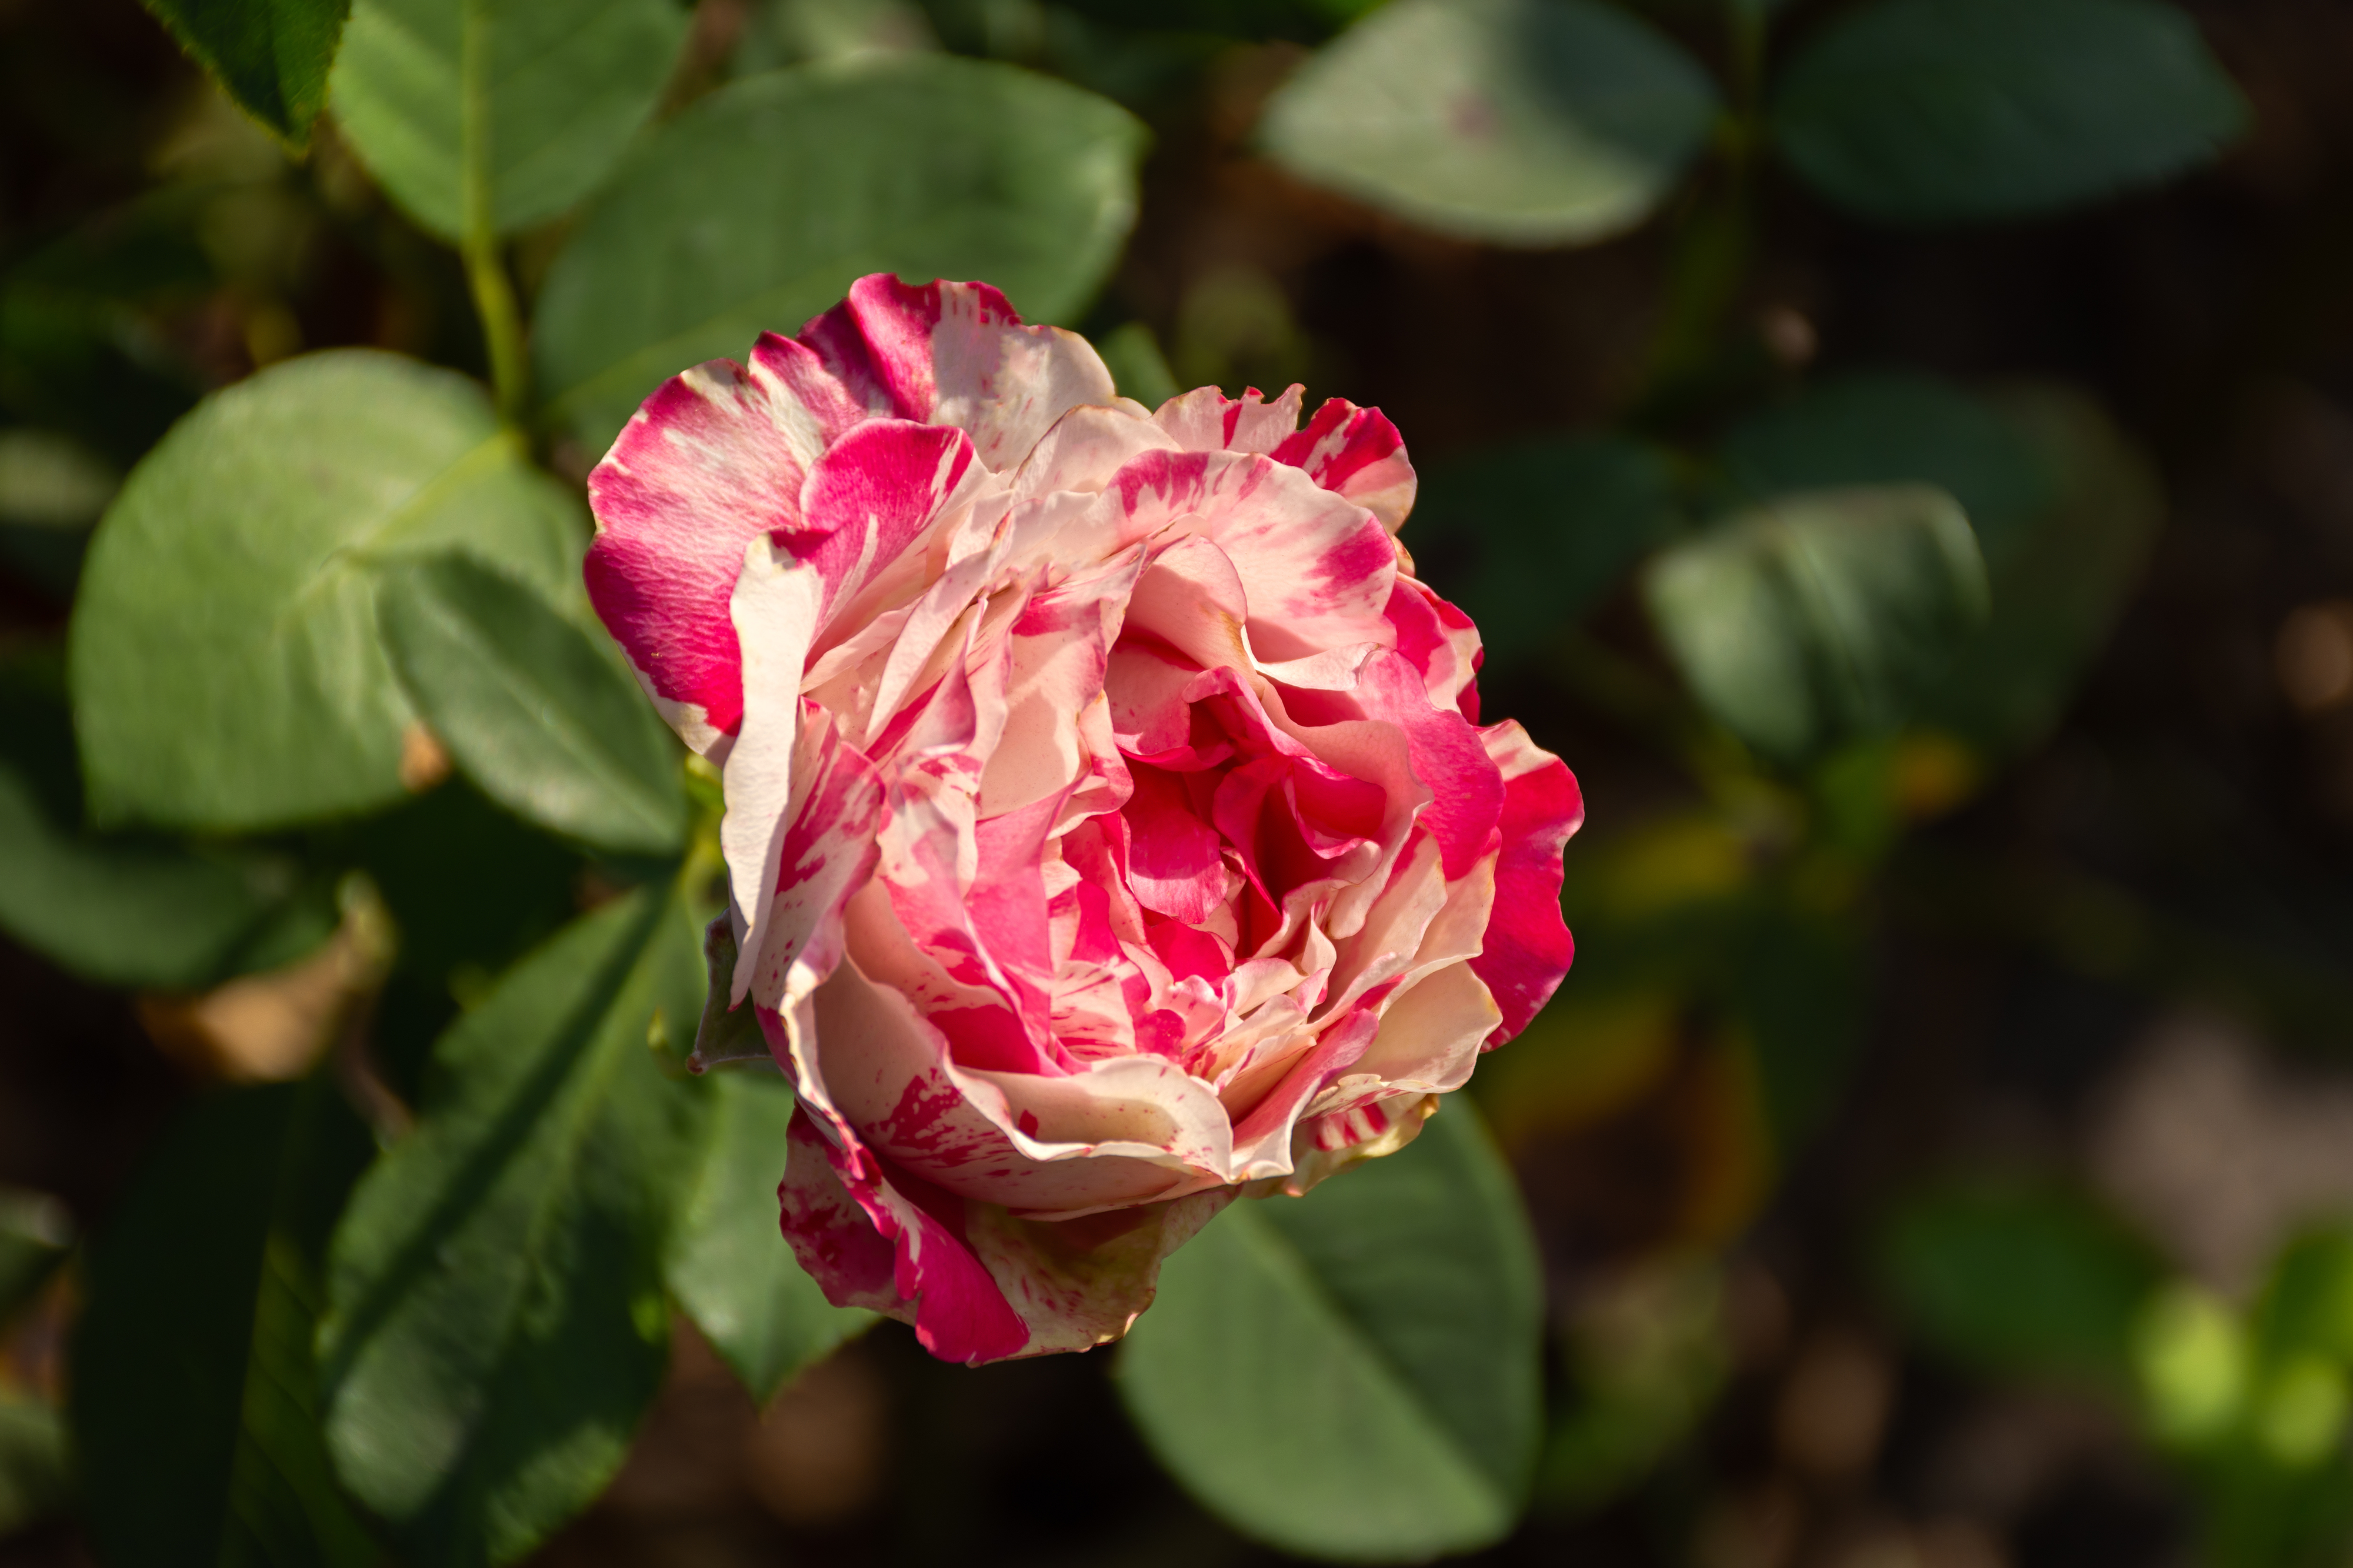 A single blooming rose in a garden. The petals are delicately layered, creating a soft and lush appearance